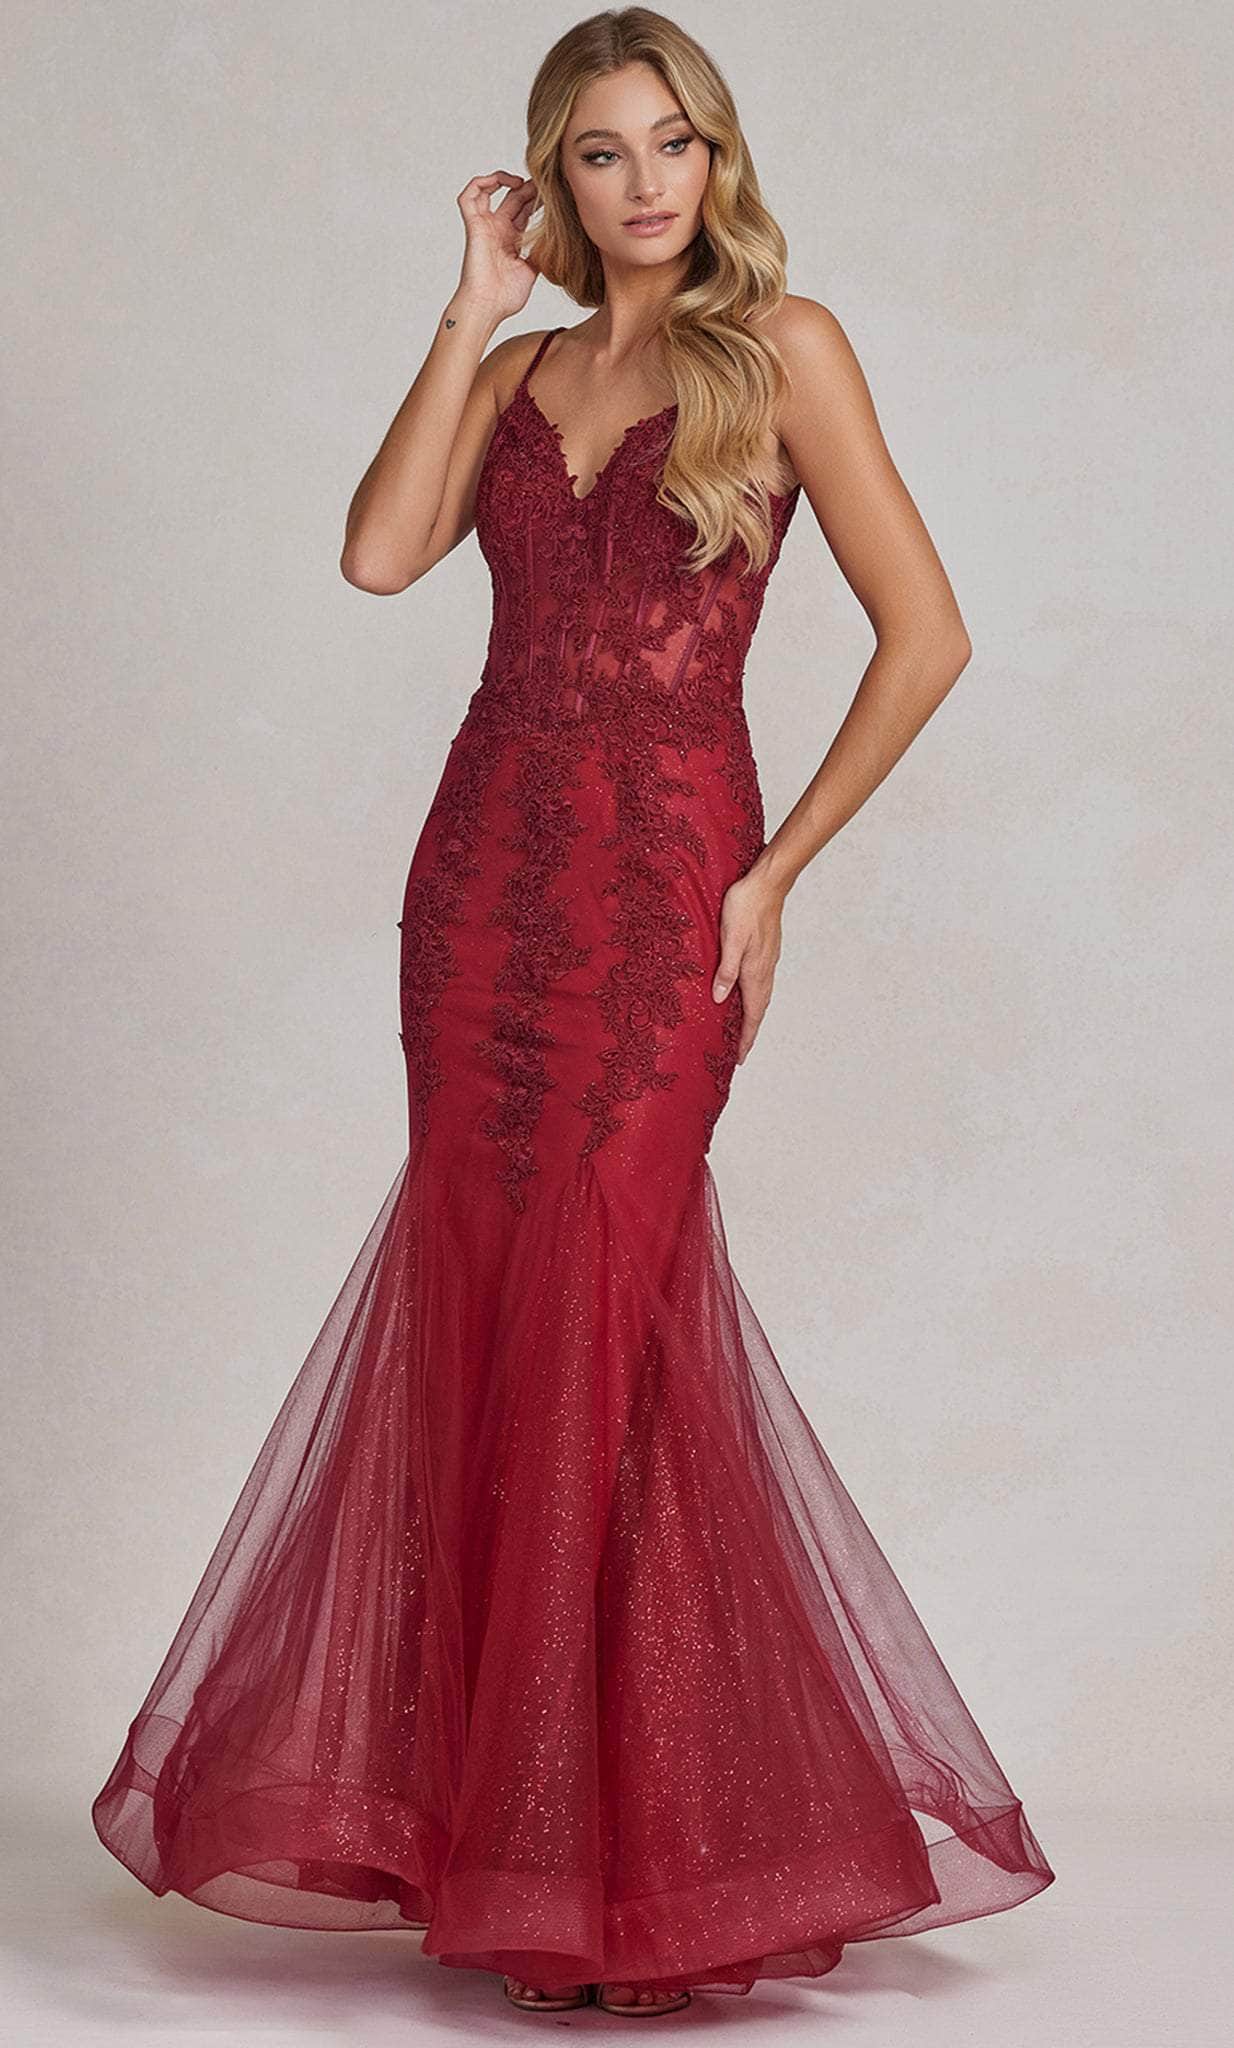 Image of Nox Anabel P1170 - Lace Appliqued Mermaid Prom Dress